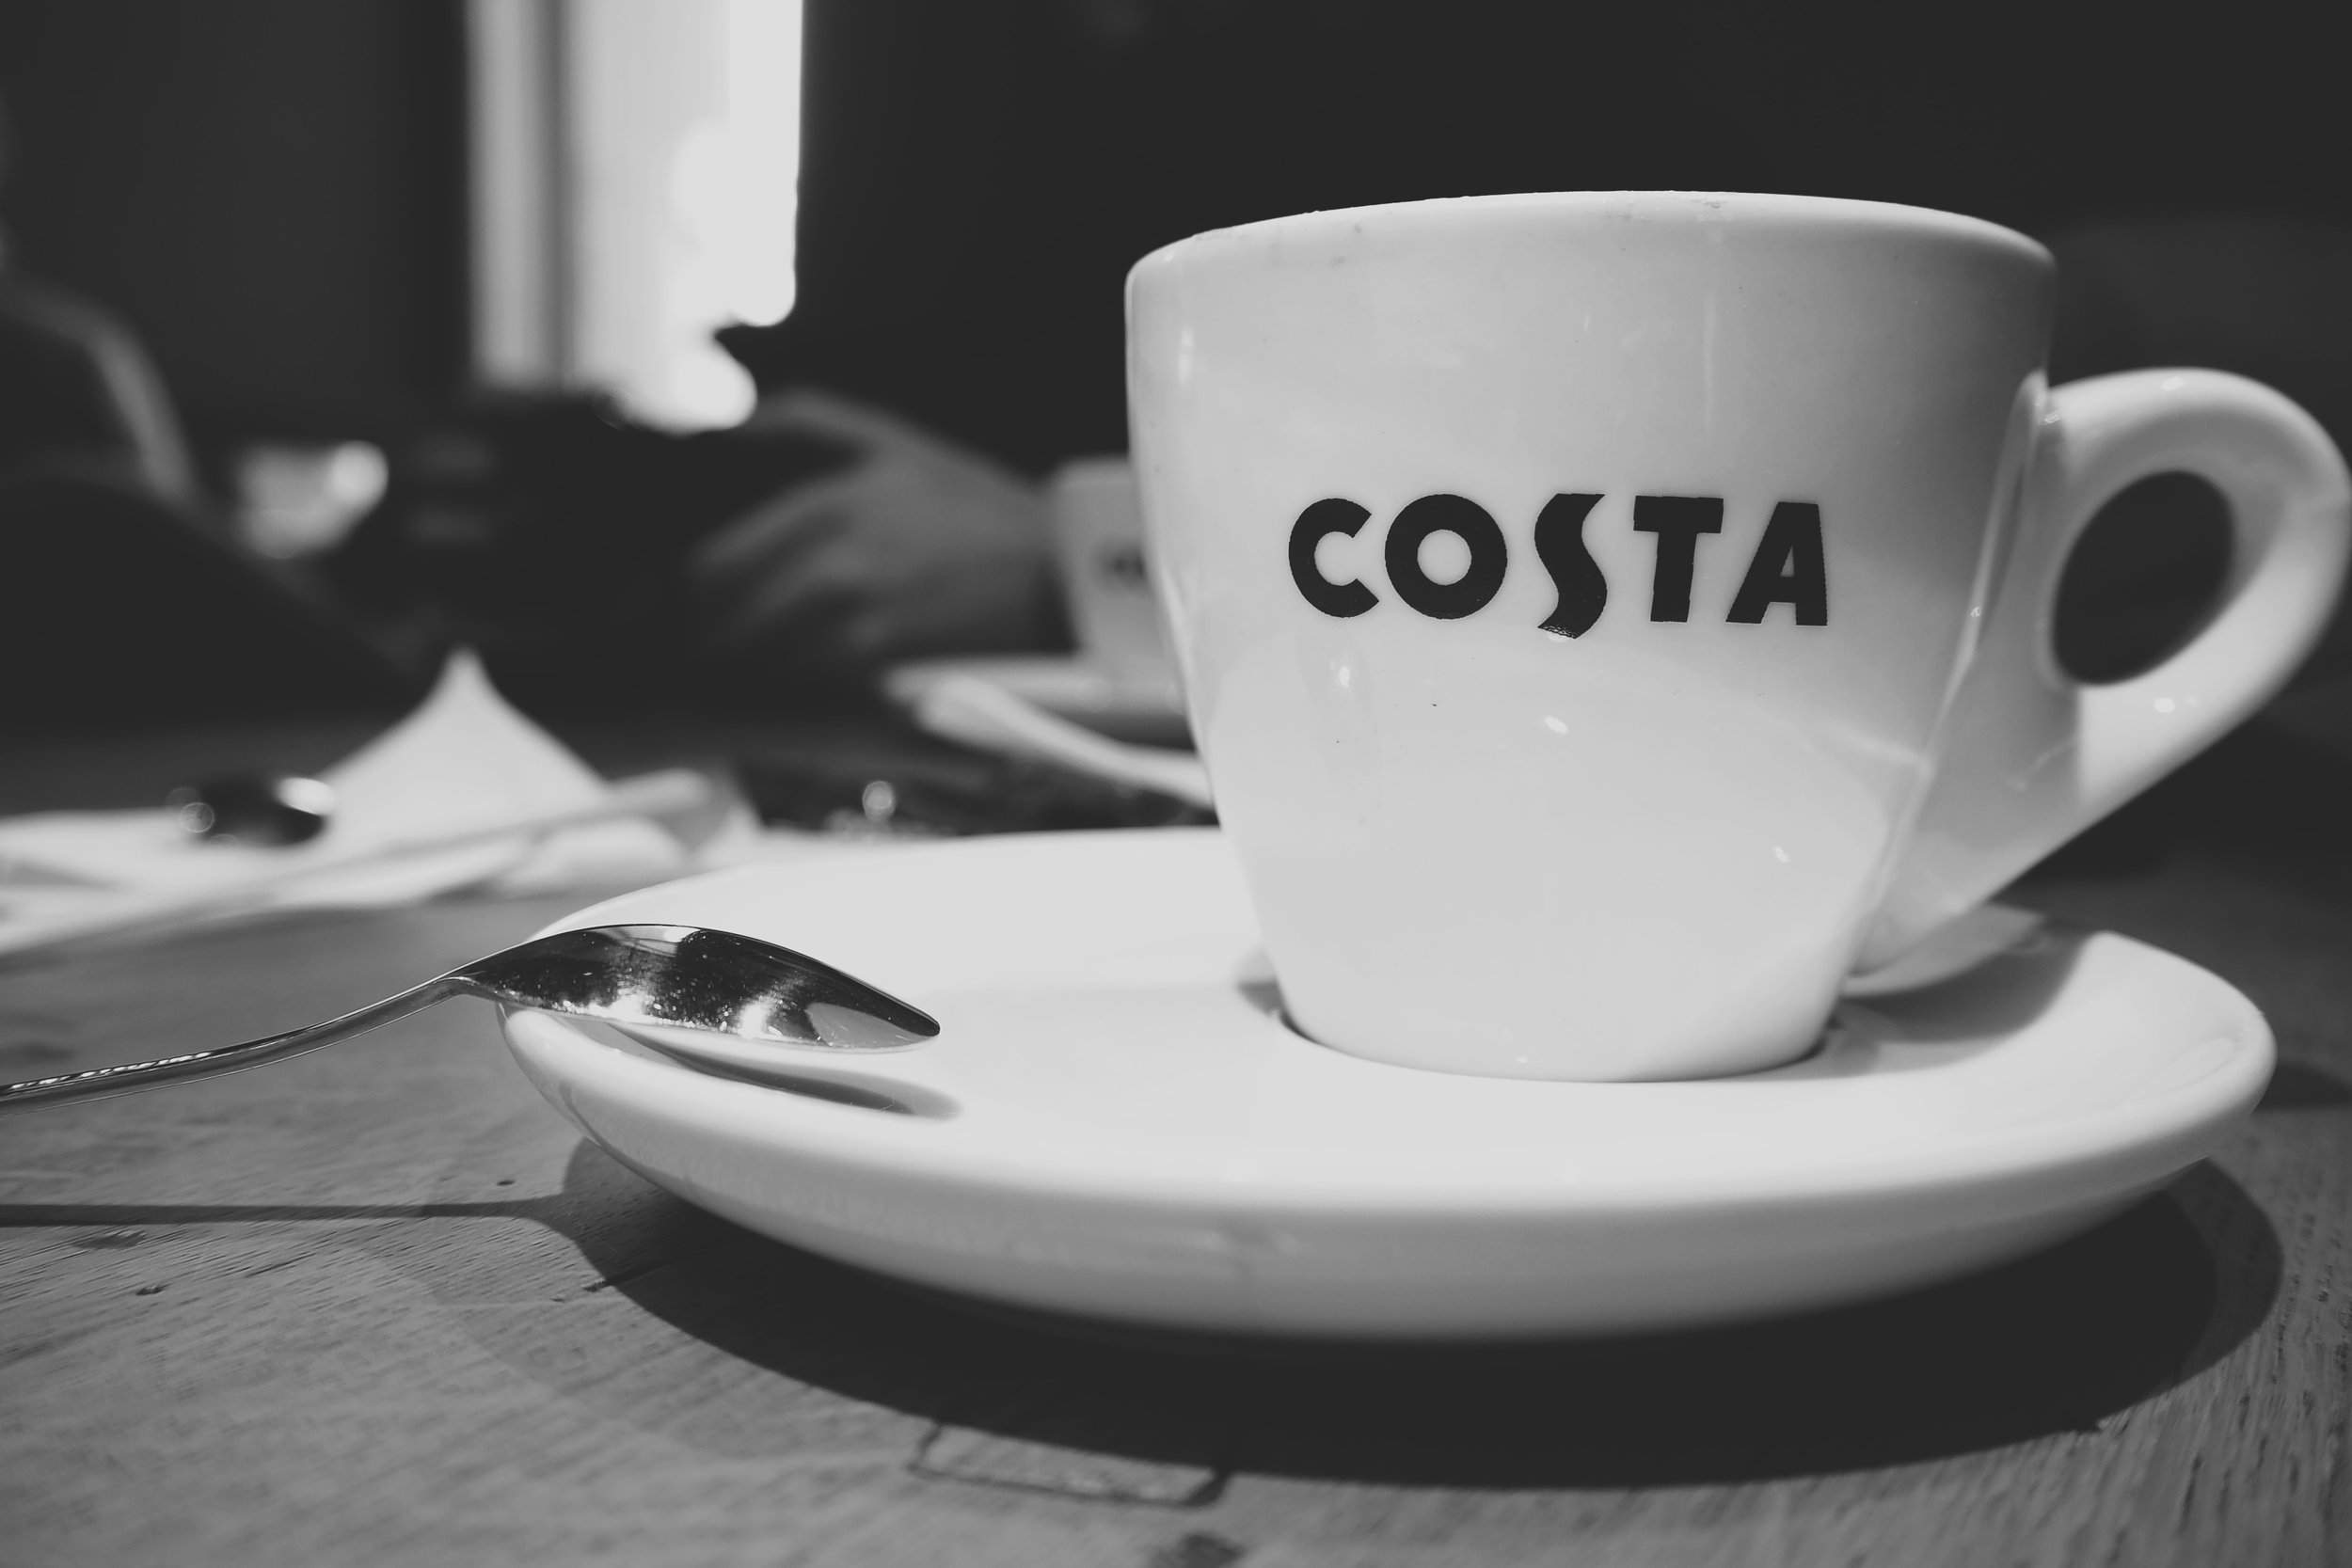 A Costa-branded coffee cup sits on a table